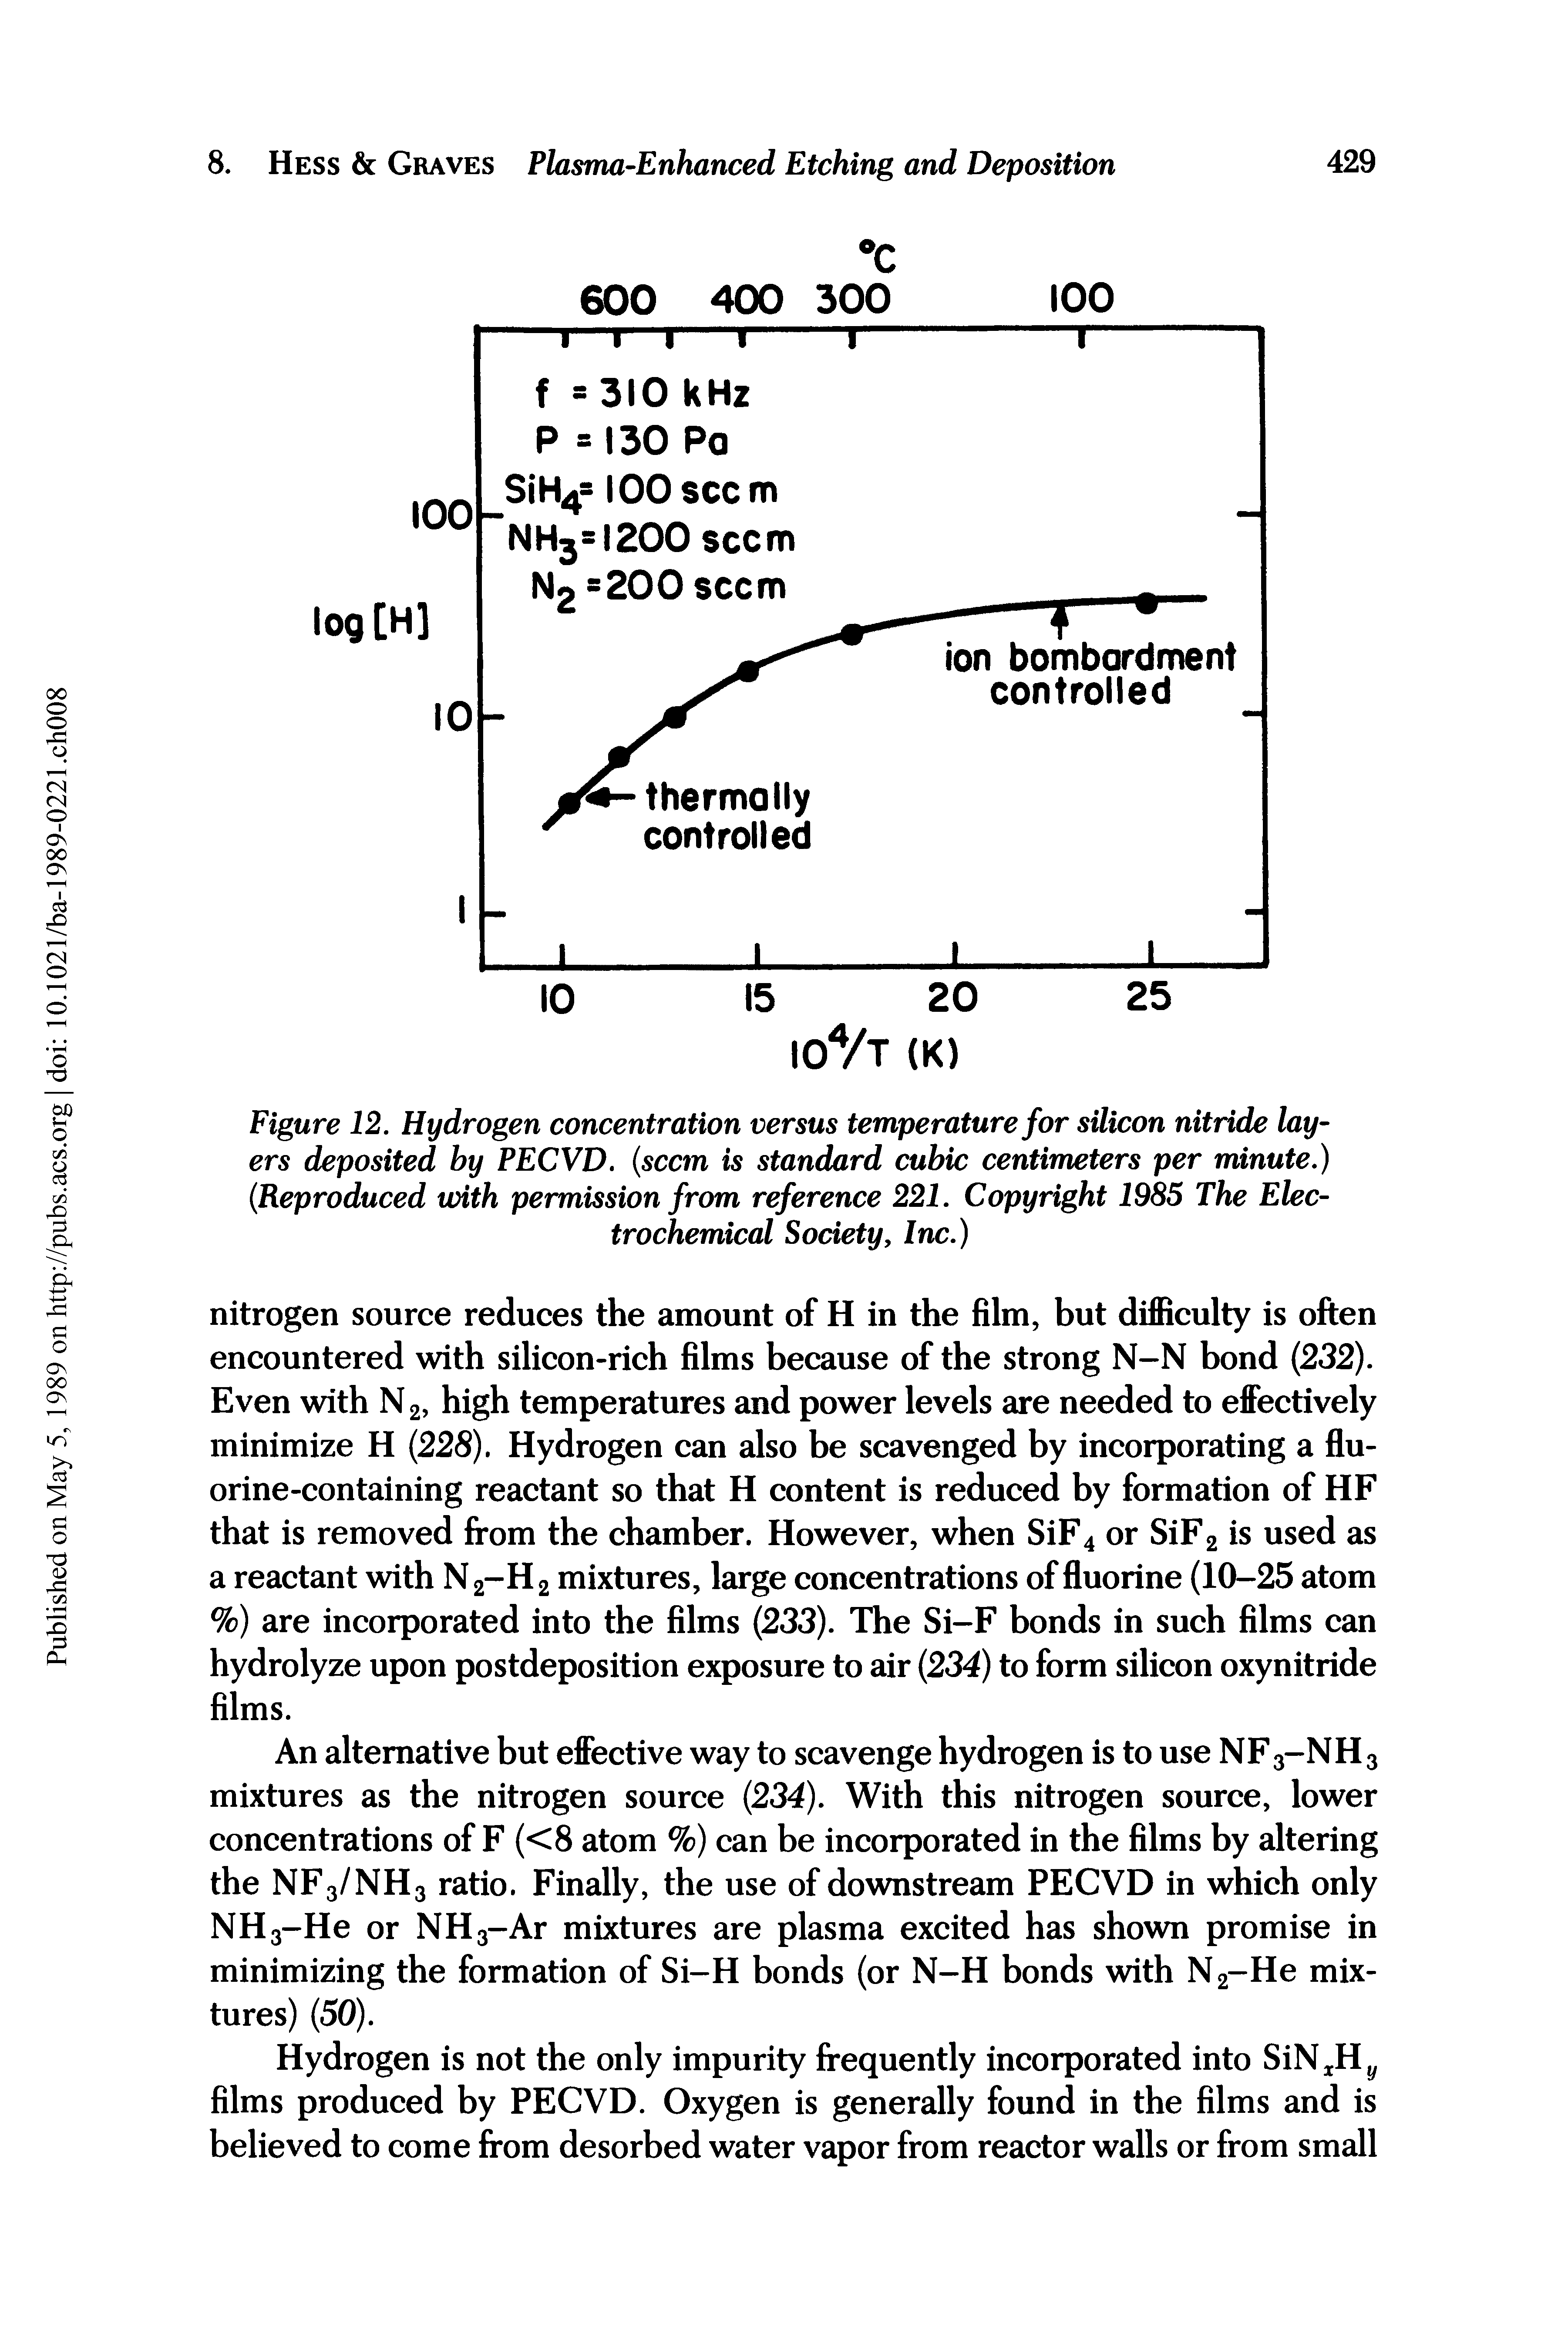 Figure 12. Hydrogen concentration versus temperature for silicon nitride layers deposited by PECVD. (seem is standard cubic centimeters per minute.) (Reproduced with permission from reference 221. Copyright 1985 The Electrochemical Society, Inc.)...